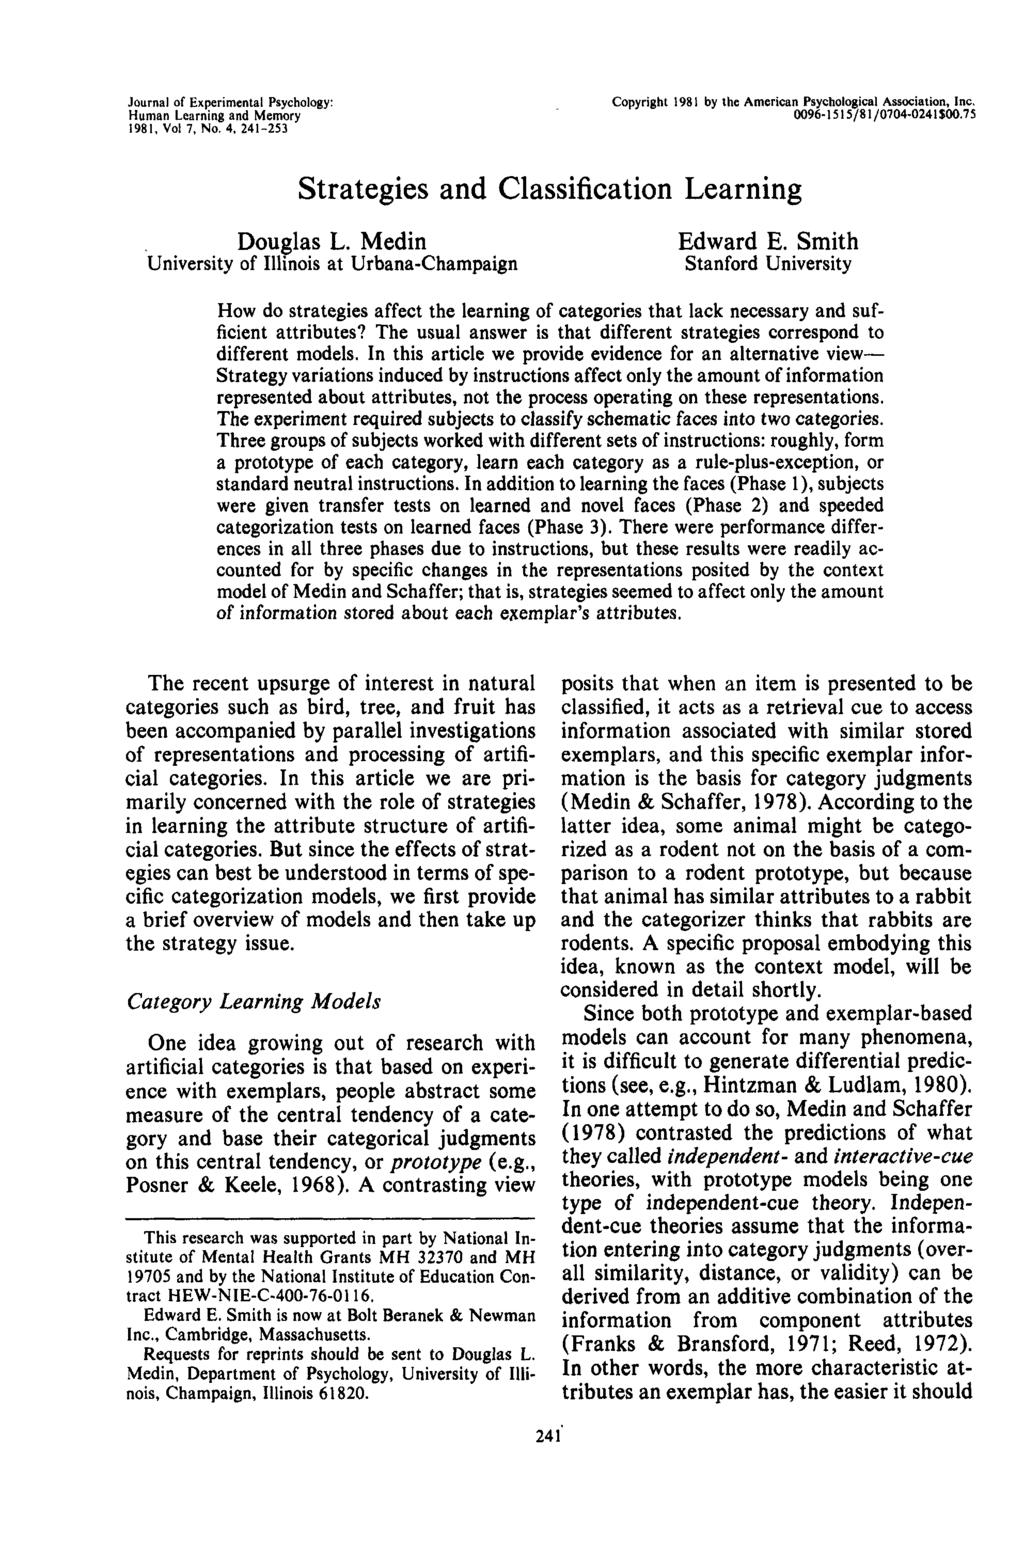 Journal of Experimental Psychology: Human Learning and Memory 98, Vol 7, No. 4, 24-253 Copyright 98 by the American Psychological Association, Inc. 96-55/8/74-24J.